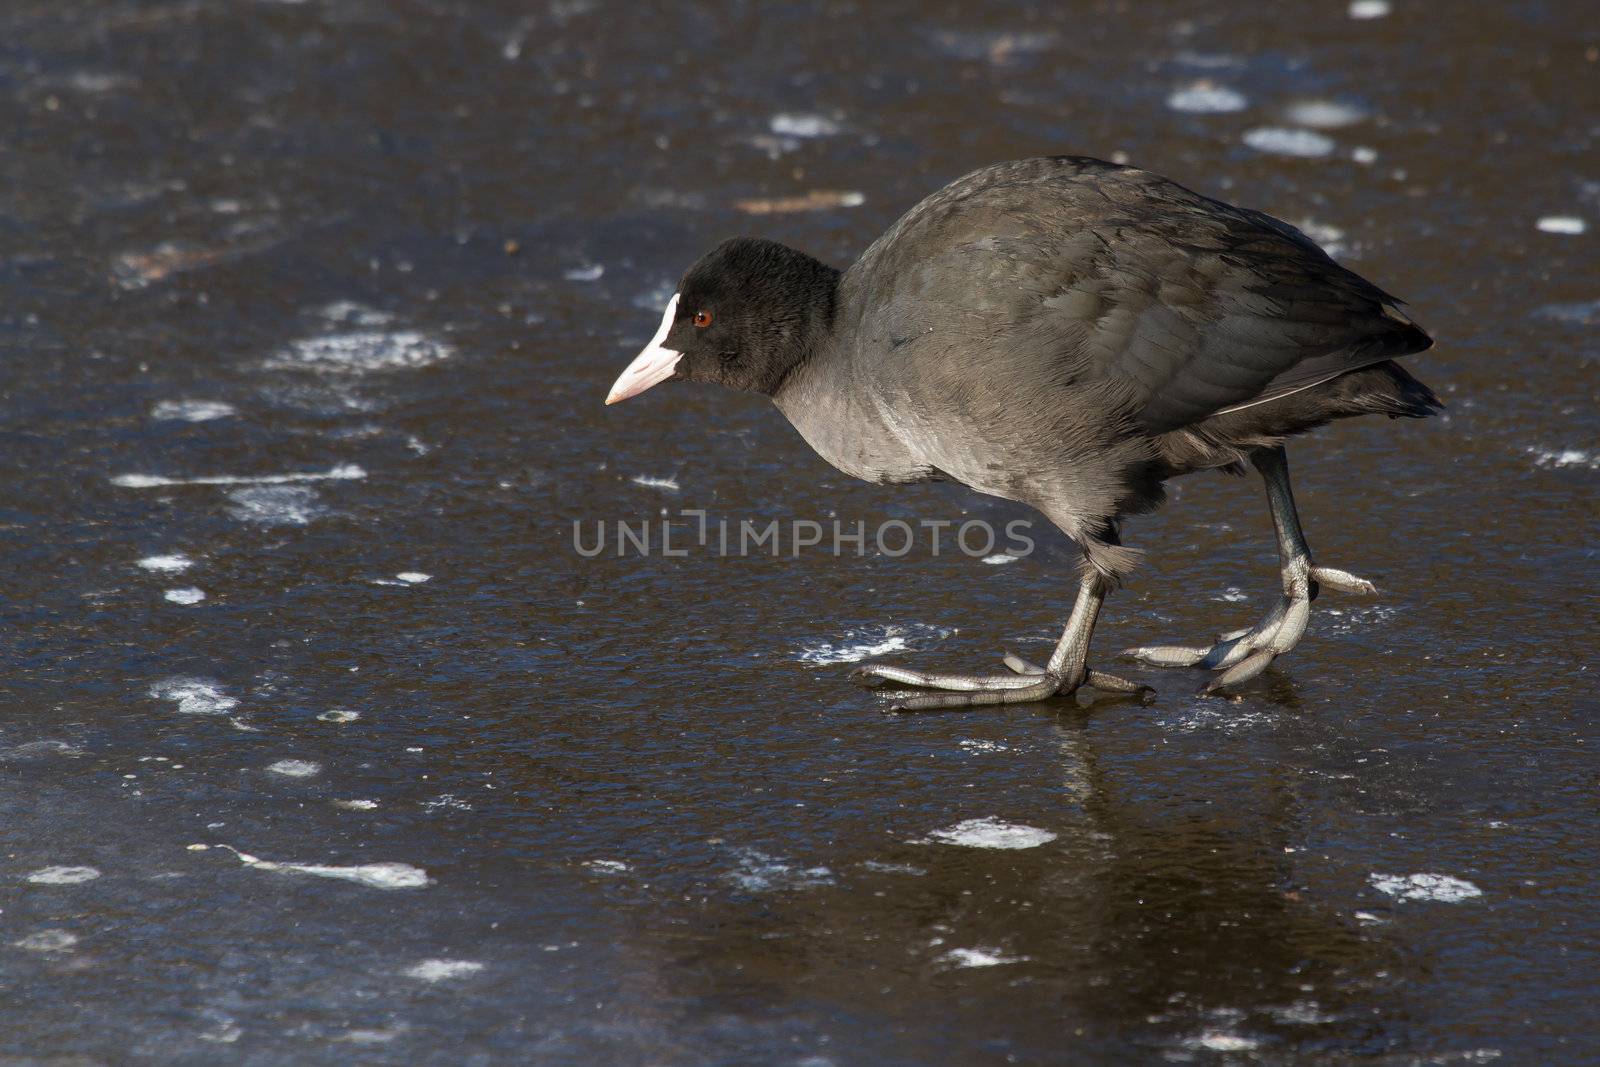 A common coot by michaklootwijk